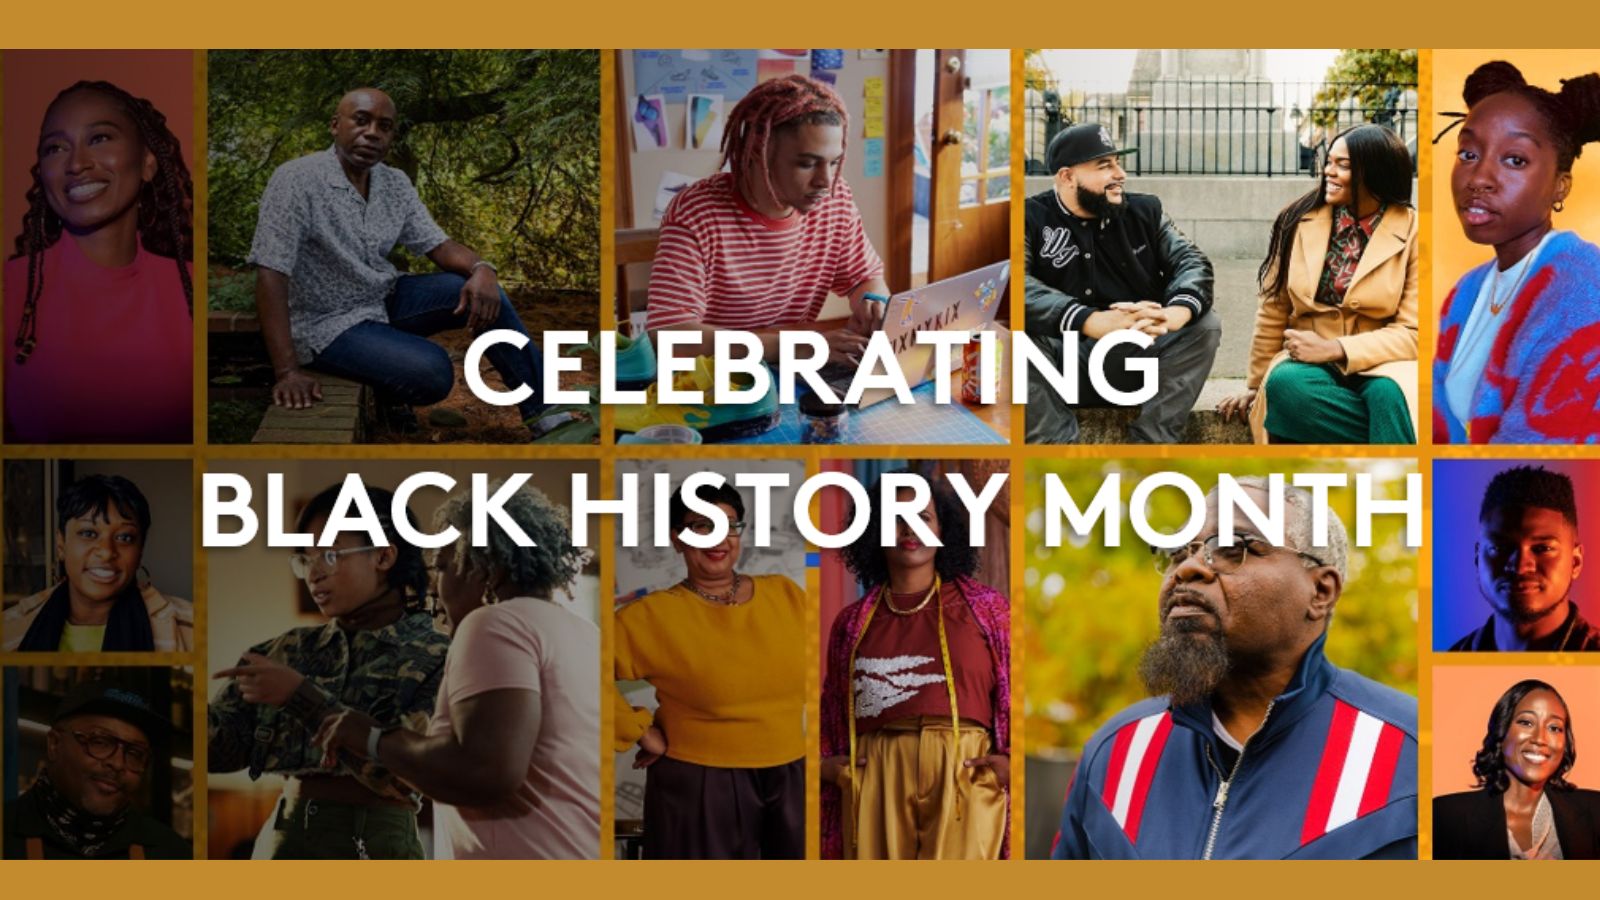 Comcast Celebrates Black History Month by Honoring Black Changemakers & Icons